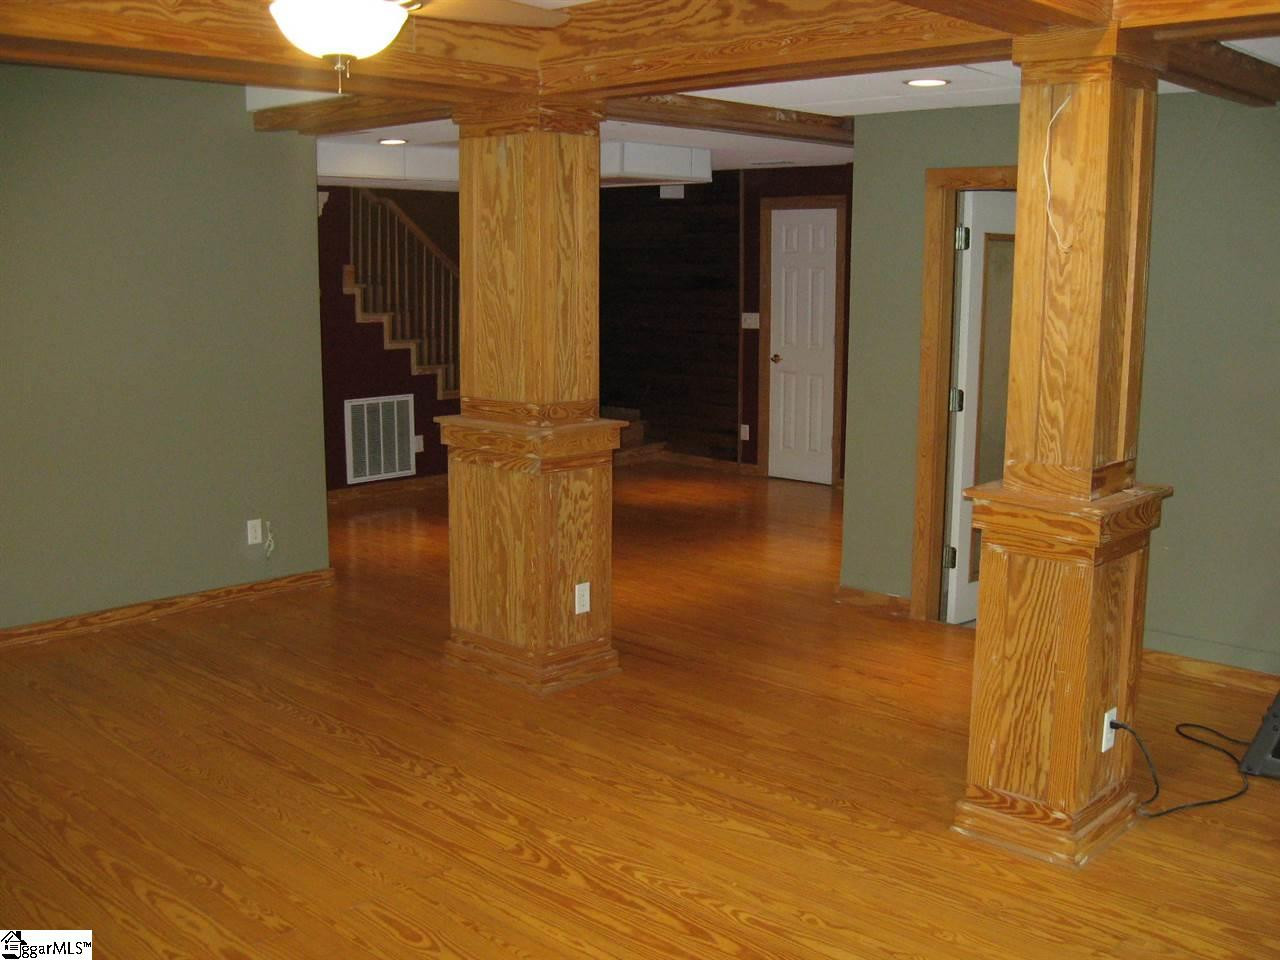 14 Nice Hardwood Floor Cleaning Greenville Sc 2024 free download hardwood floor cleaning greenville sc of mlsa 1376261 417 elizabeth drive greenville sc home for sale with regard to 1378687 residential 4pg1kw o